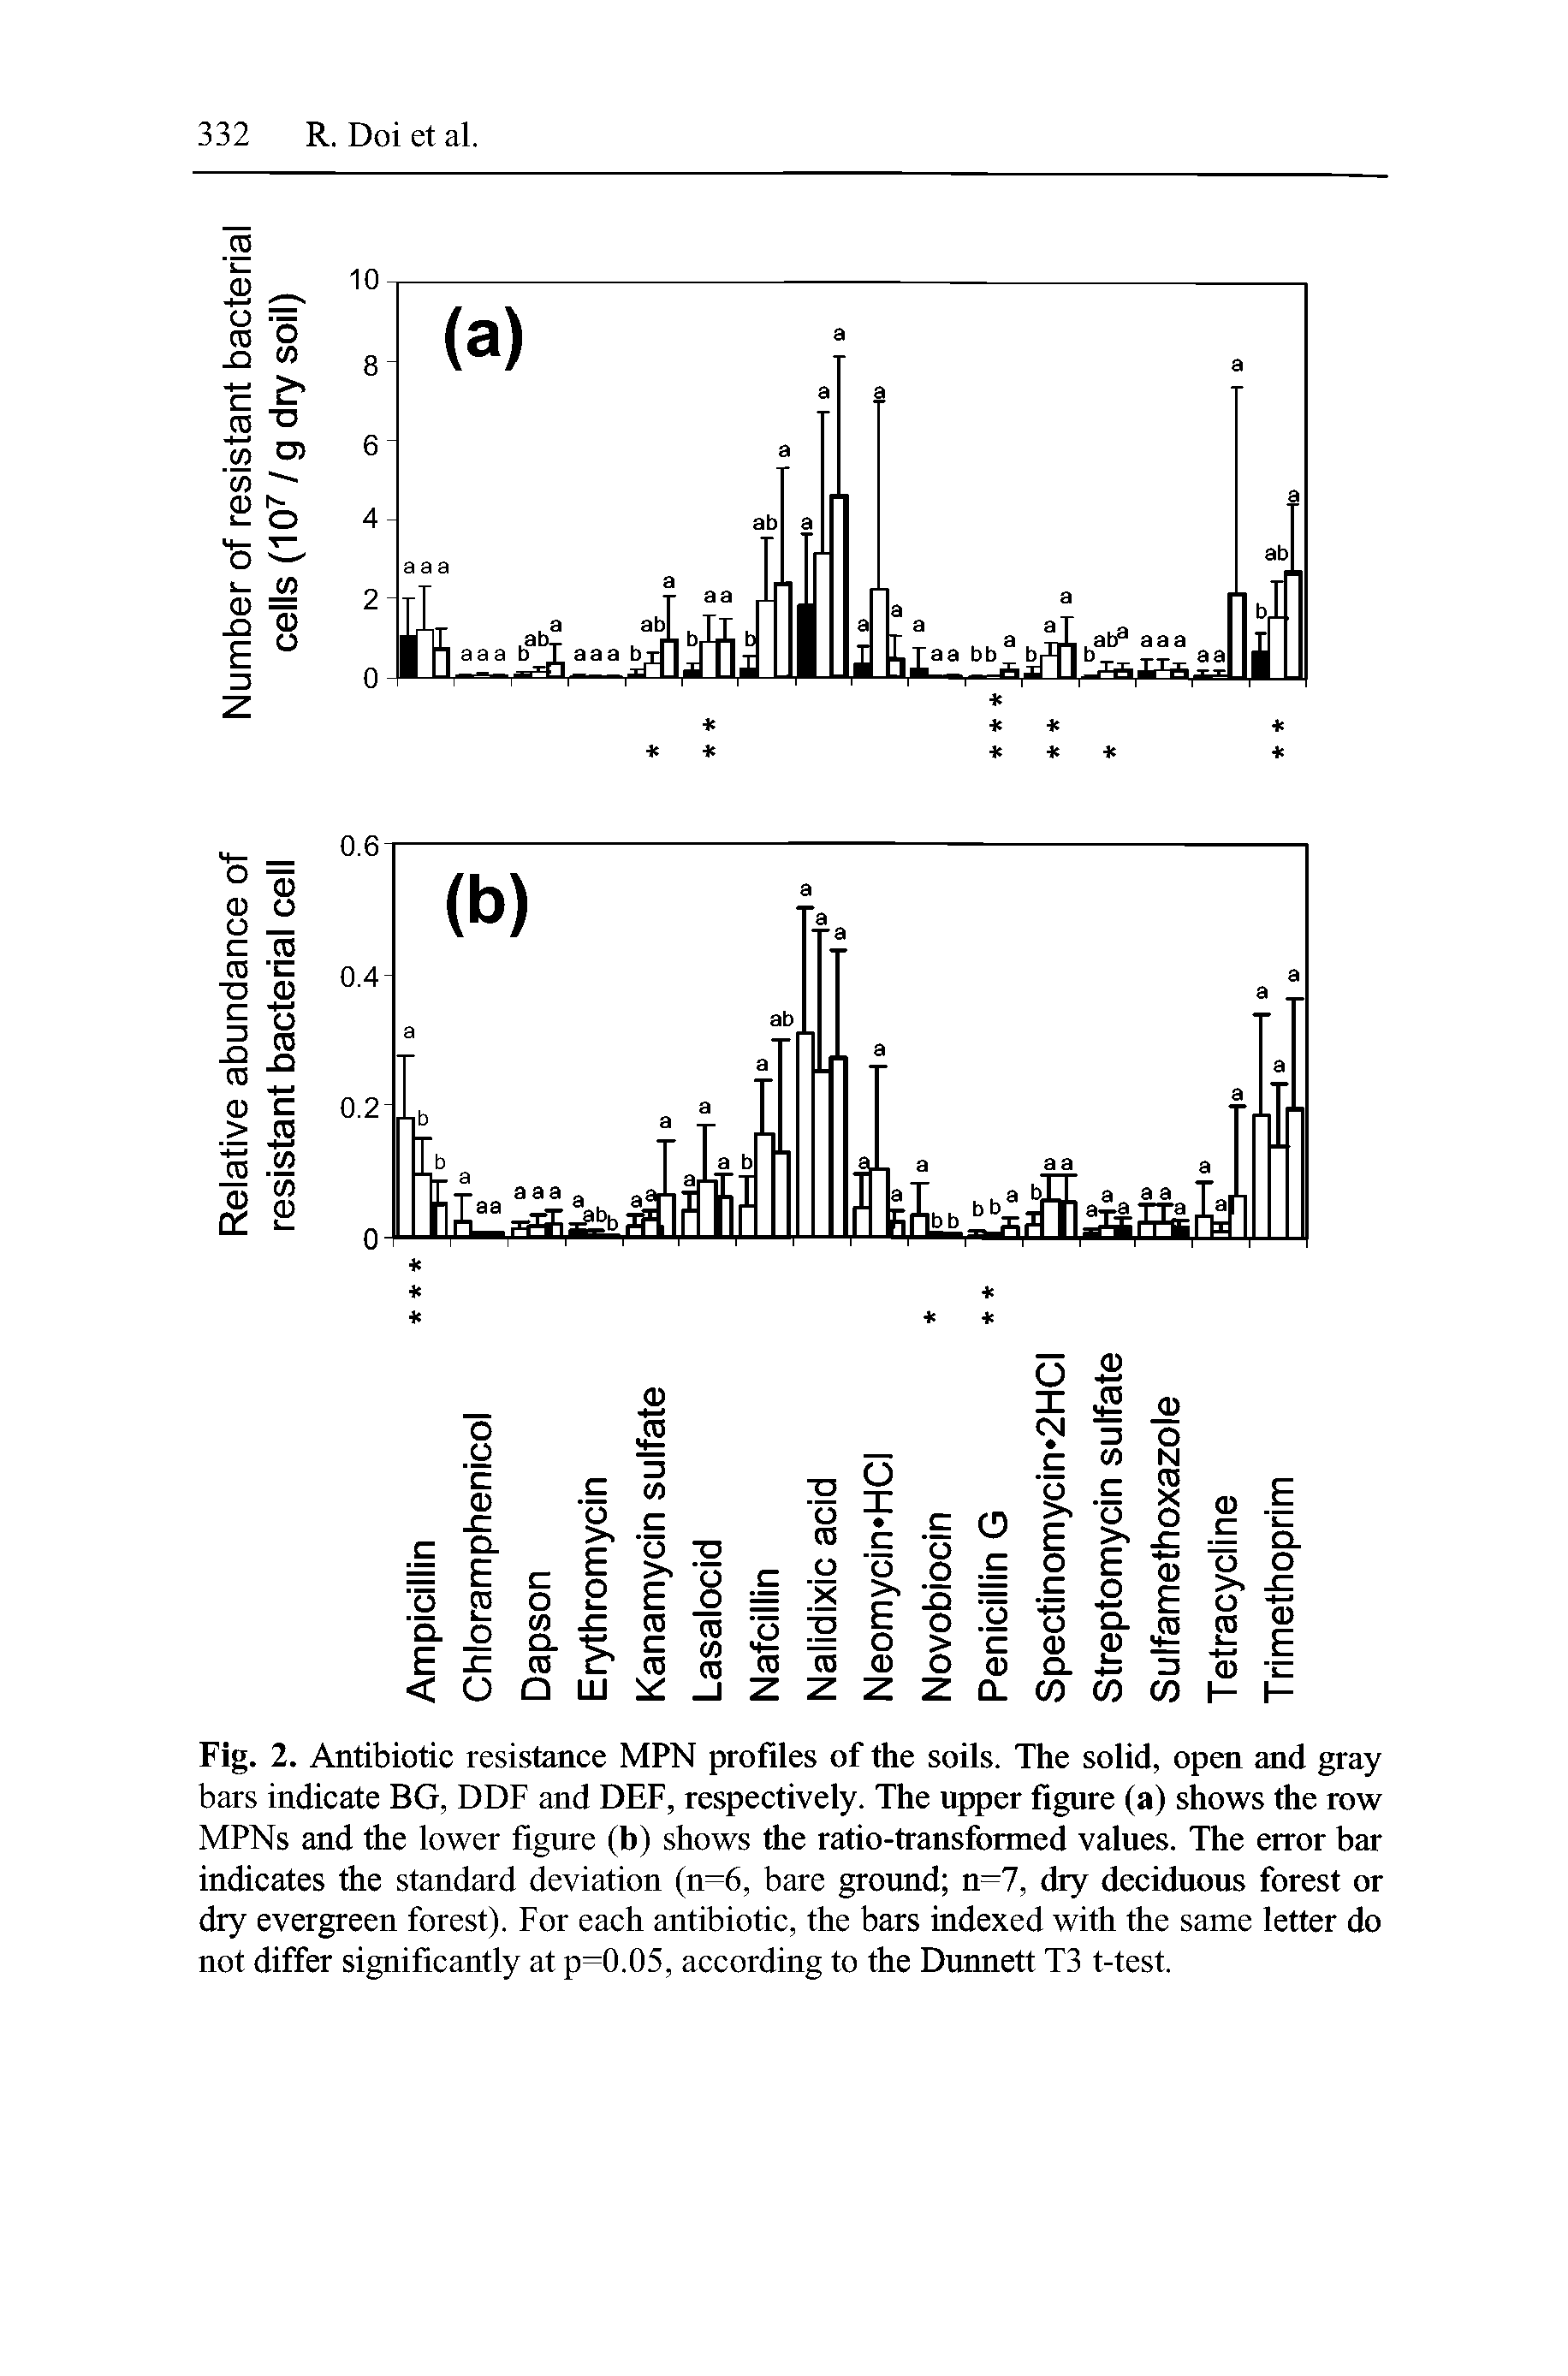 Fig. 2. Antibiotic resistance MPN profiles of the soils. The solid, open and gray bars indicate BG, DDF and DEF, respectively. The upper figure (a) shows the row MPNs and the lower figure (b) shows the ratio-transformed values. The error bar indicates the standard deviation (n=6, bare ground n=7, dry deciduous forest or dry evergreen forest). For each antibiotic, the bars indexed with the same letter do not differ significantly at p=0.05, according to the Dunnett T3 t-test.